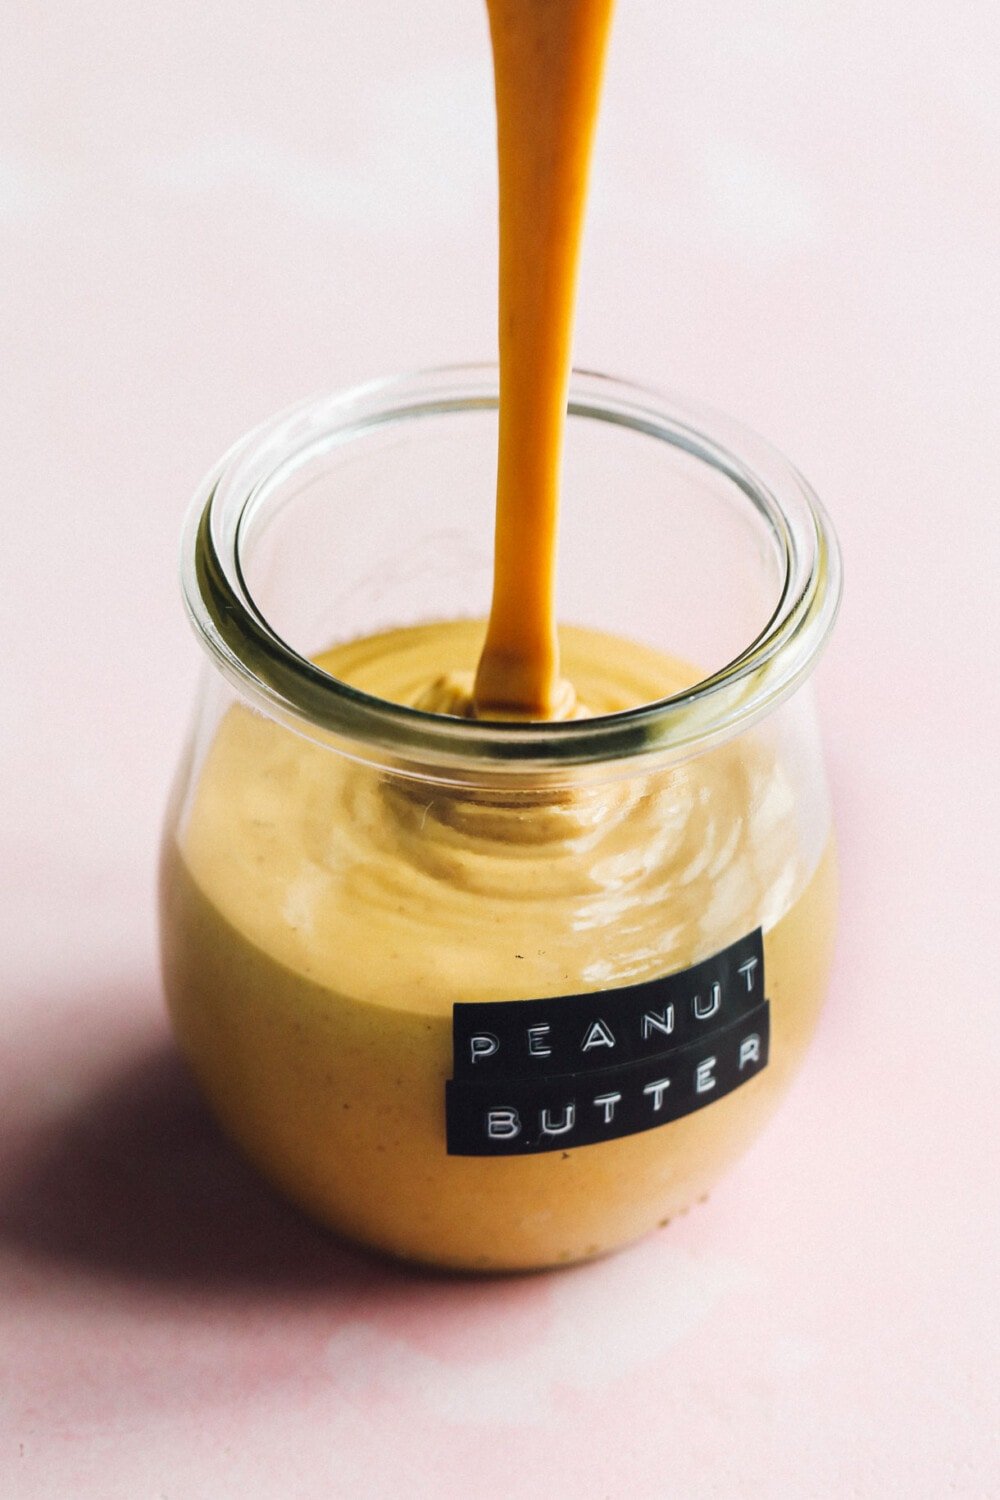 pouring peanut butter into a glass jar with label